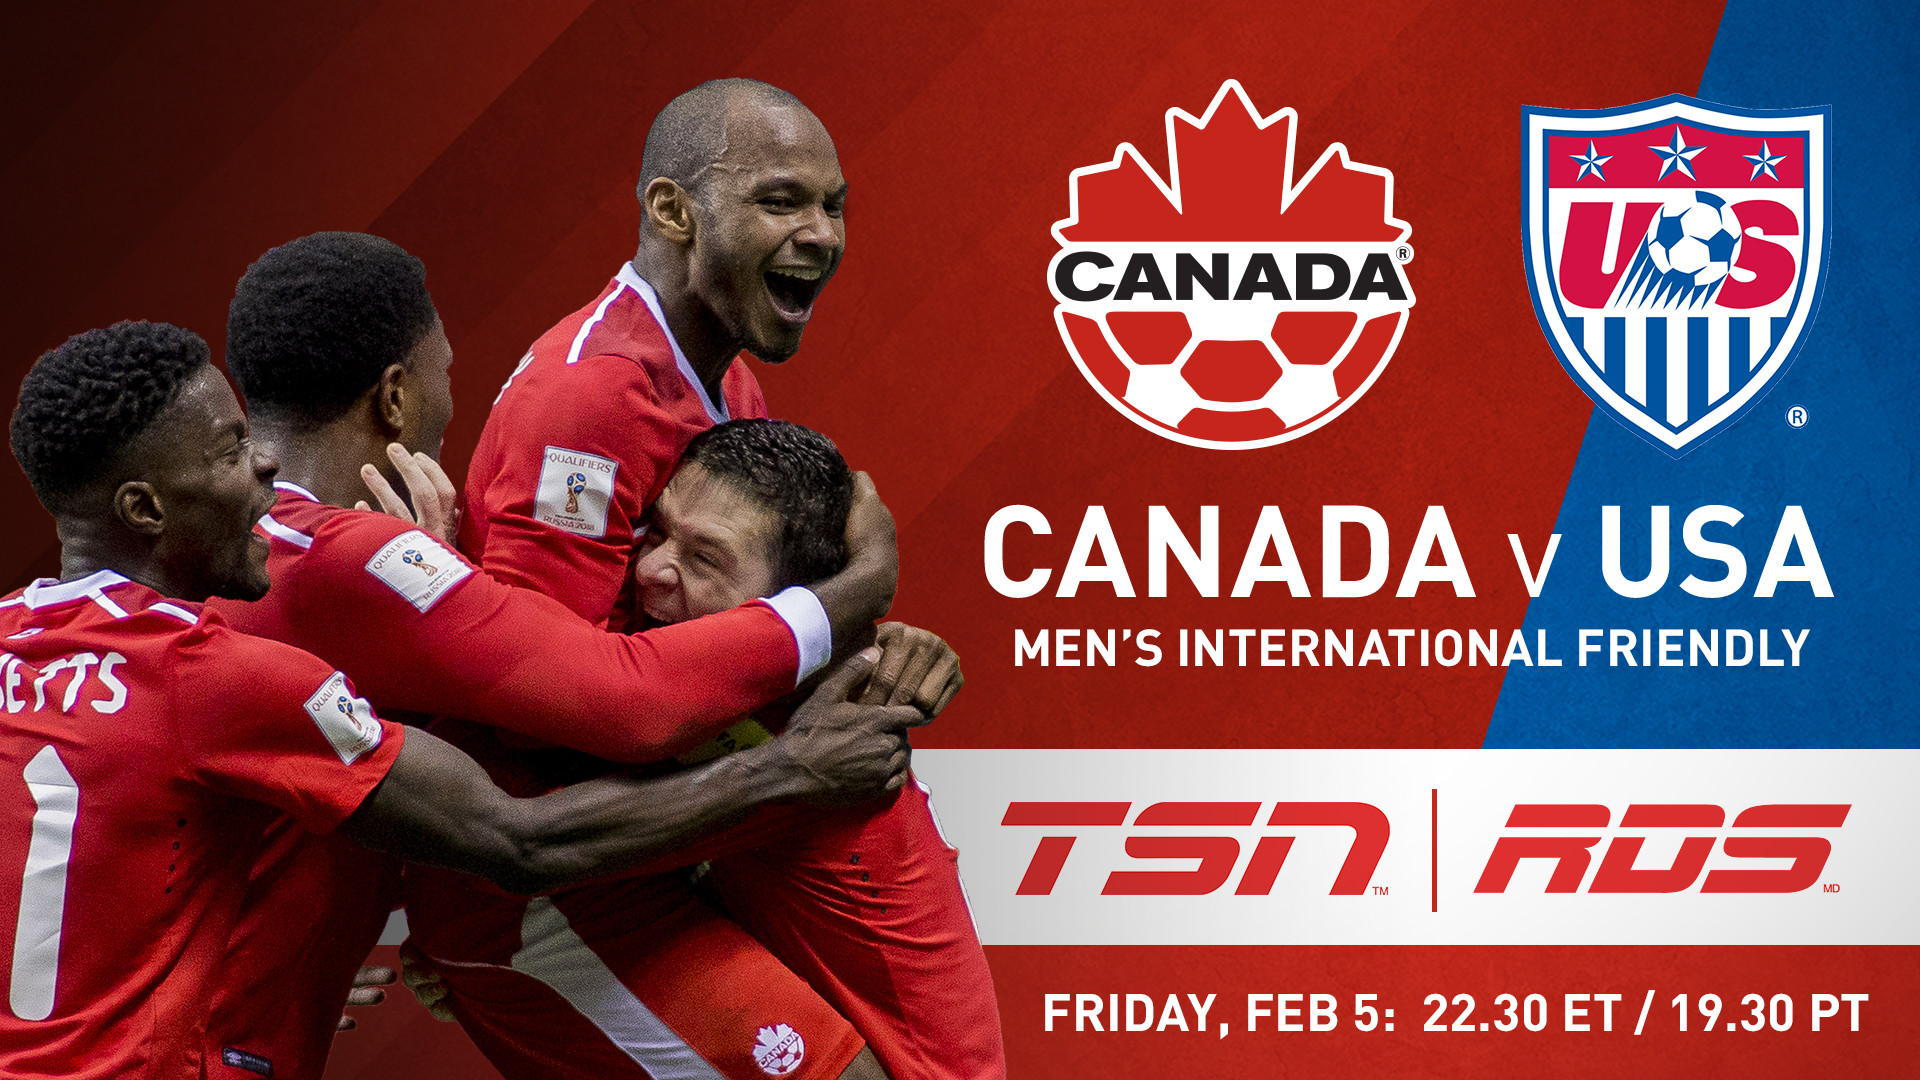 1920x1080 MOMENTUM BULDING FOR MARCH 25th CANADA V MEXICO MATCH AT BC PLACE